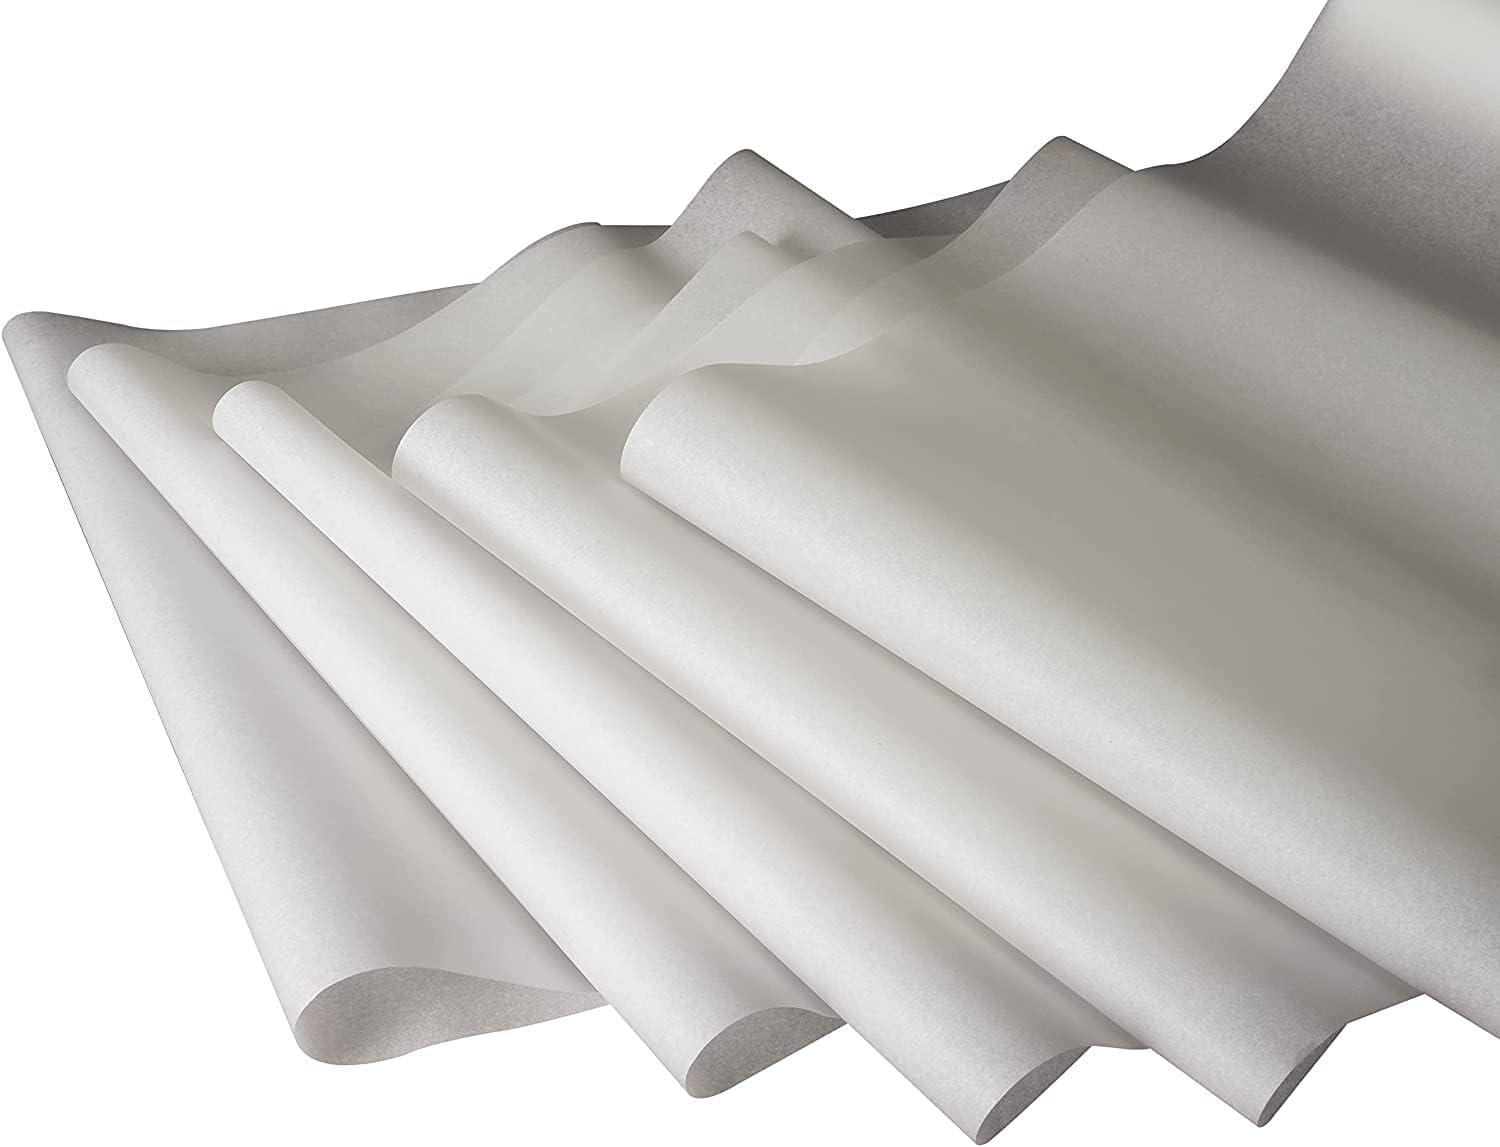 Blick Studio Tracing Paper Roll - 12 x 50 yds, White